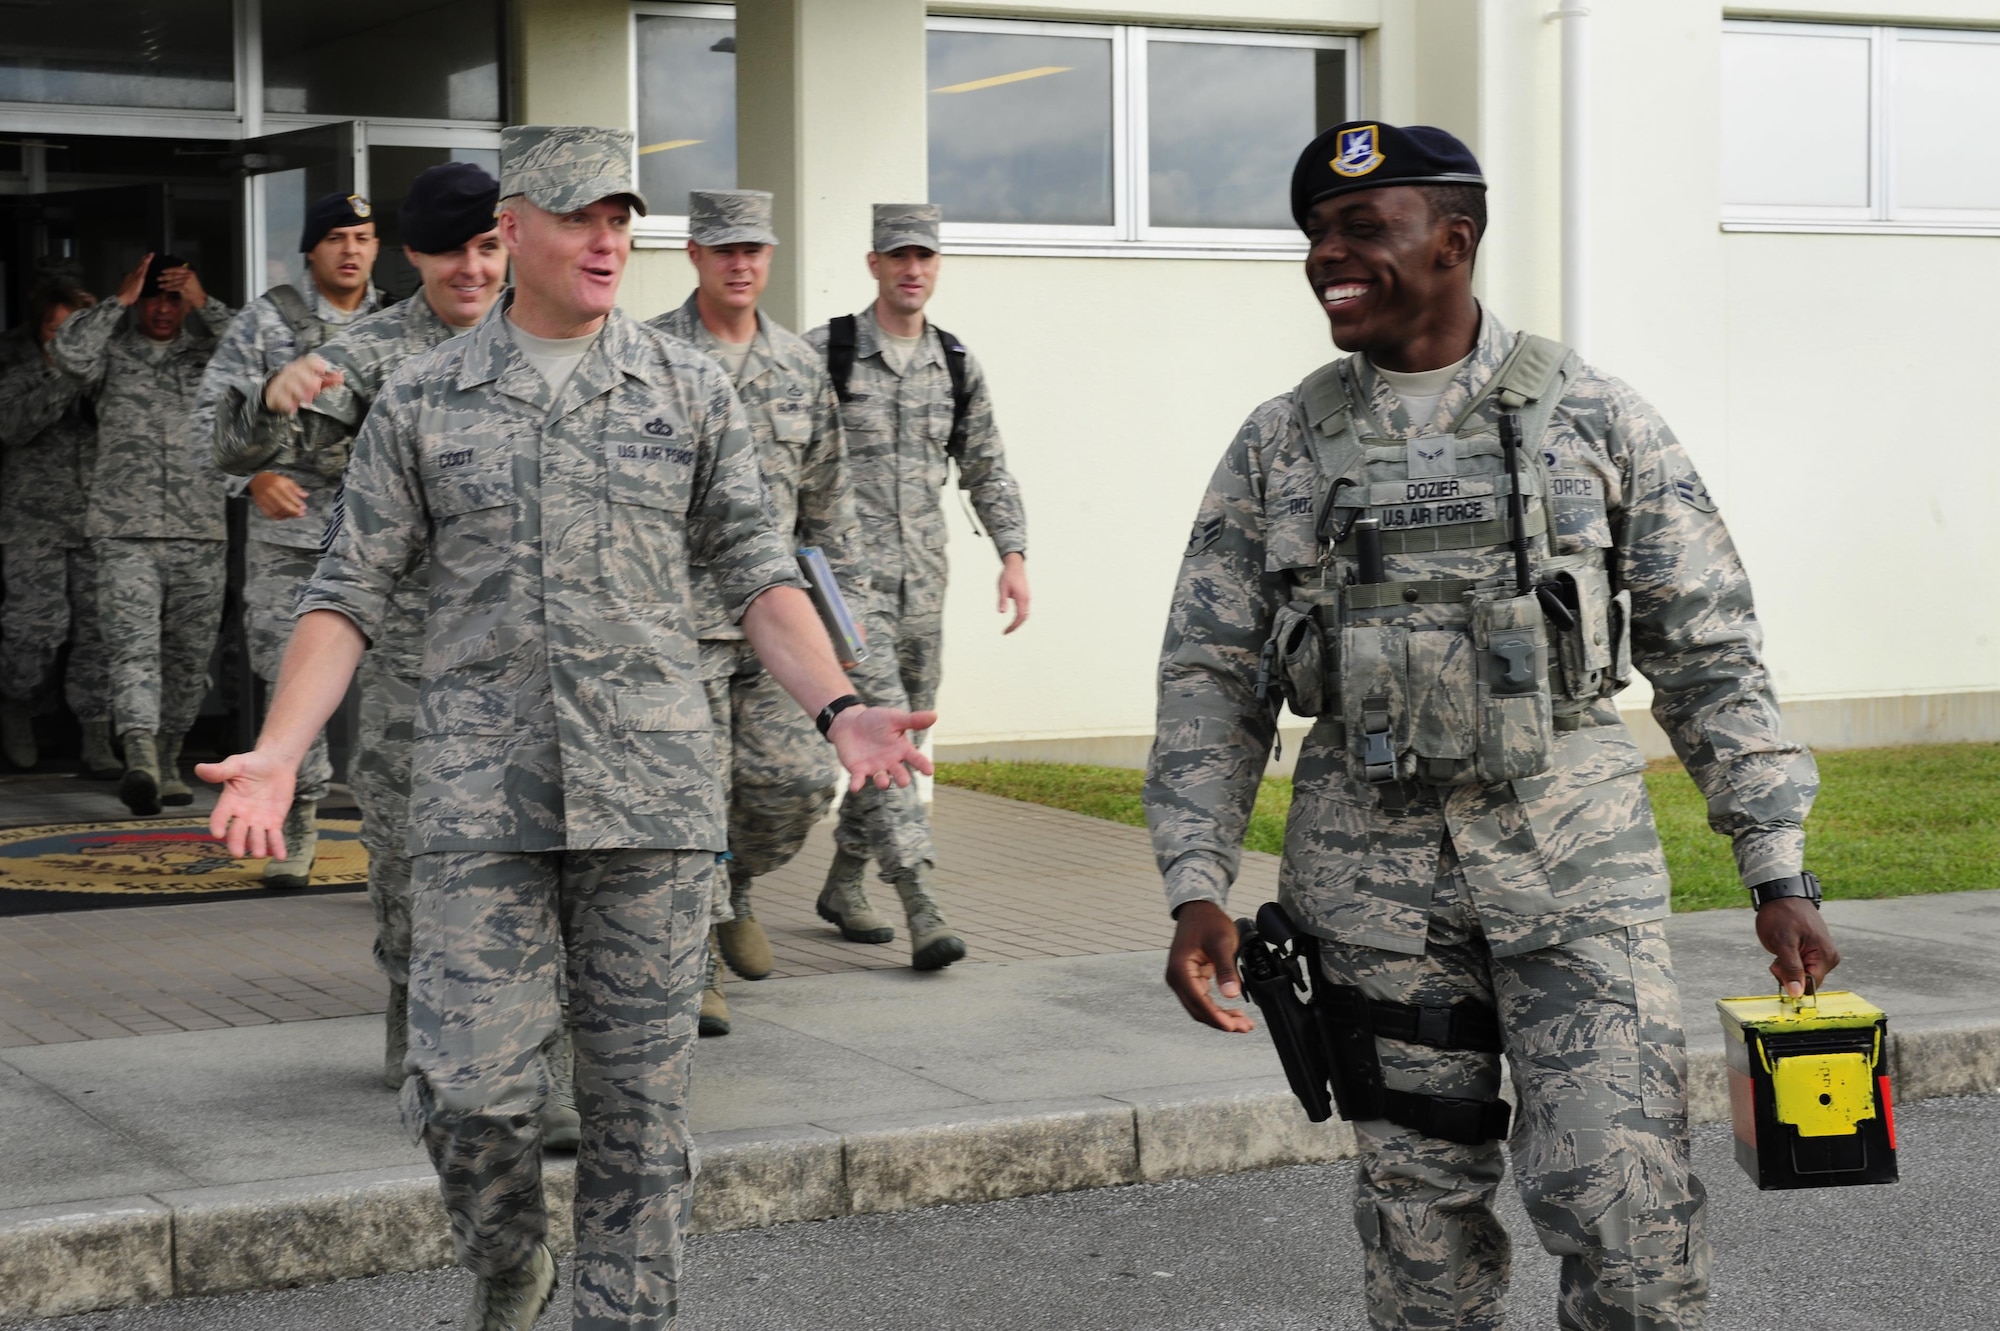 Chief Master Sgt. of the Air Force James Cody walks with U.S. Air Force Airman 1st Class Nyzavian Dozier, 18th Security Forces Squadron response force leader, July 6, 2015, at Kadena Air Base, Japan. Cody joined Dozier for a ride-along and spoke face-to-face with many other Airmen as he visited the different units and personnel that make up Team Kadena. (U.S. Air Force photo by Airman 1st Class John Linzmeier/Released).
